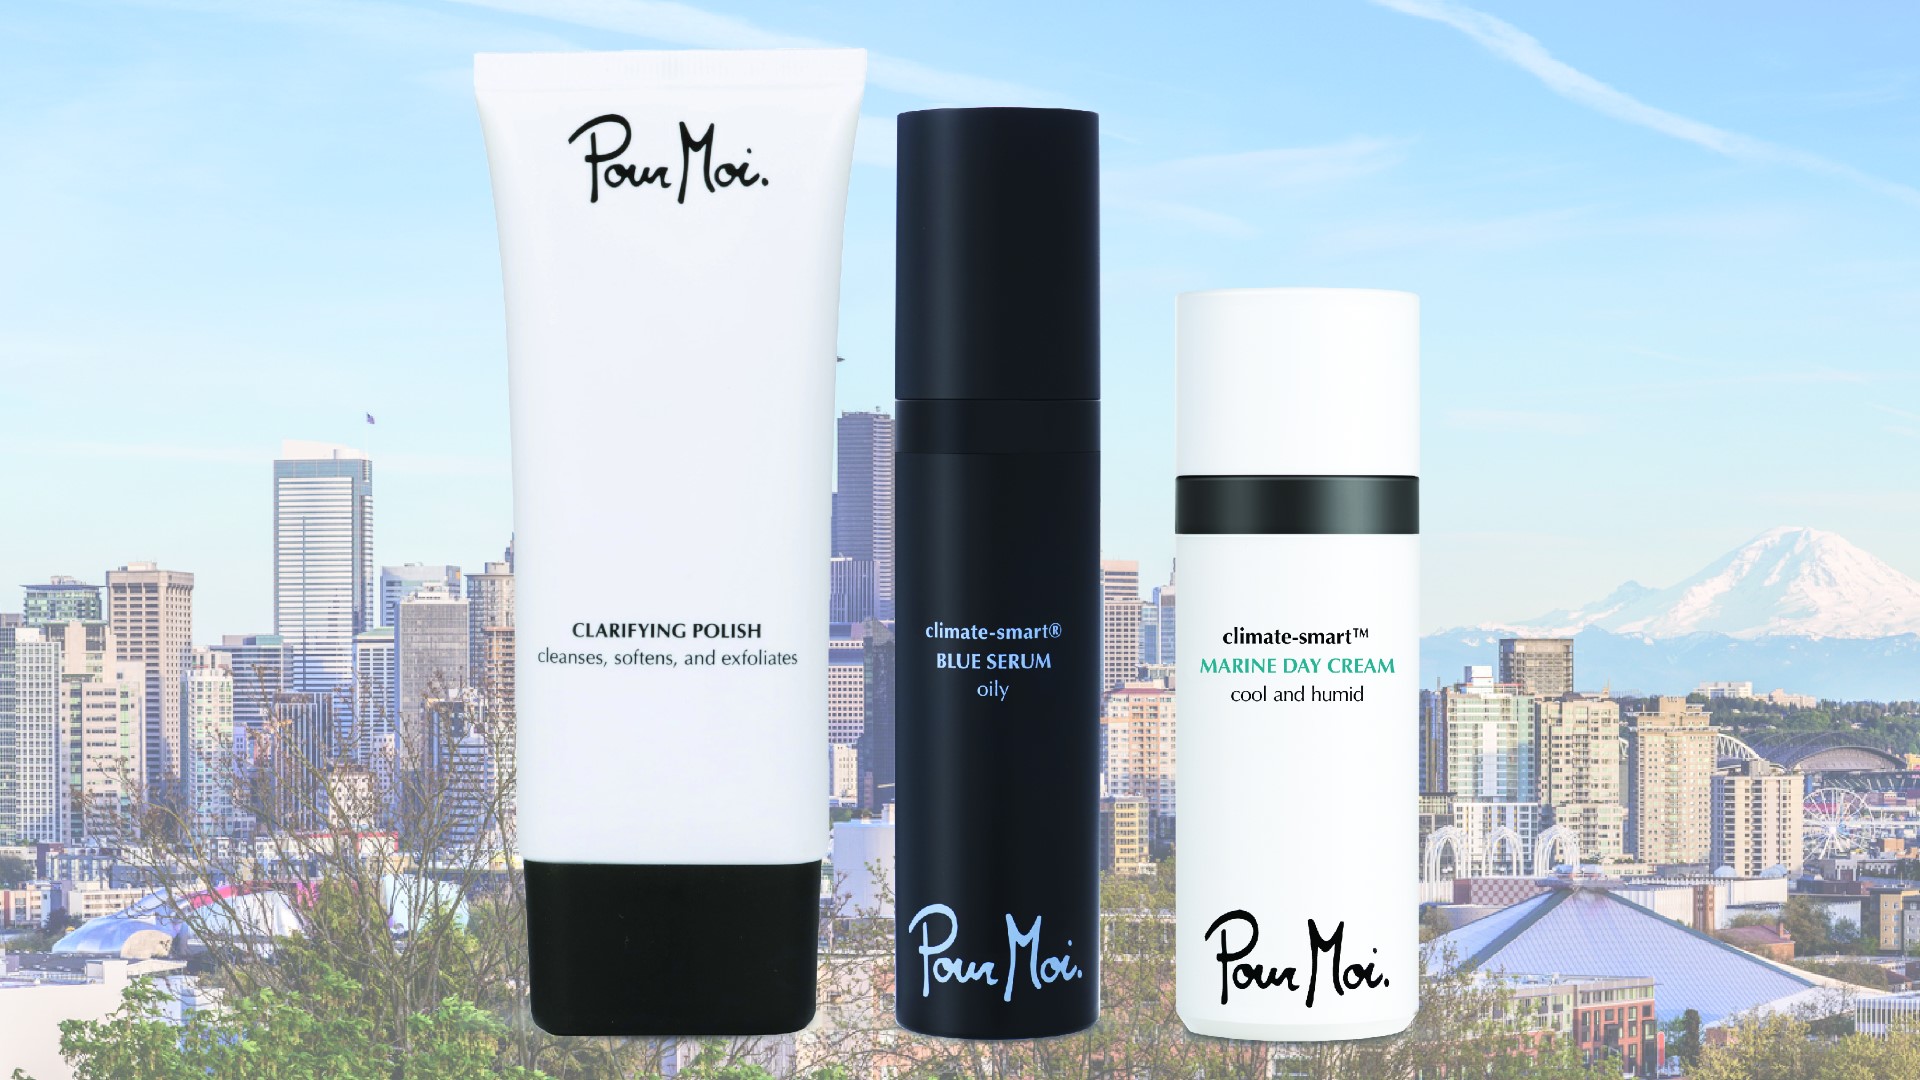 Pour Moi’s innovative geo-moisturization products were recognized as one of TIME Magazine’s Best Inventions in 2020. Sponsored by Pour Moi Skincare.